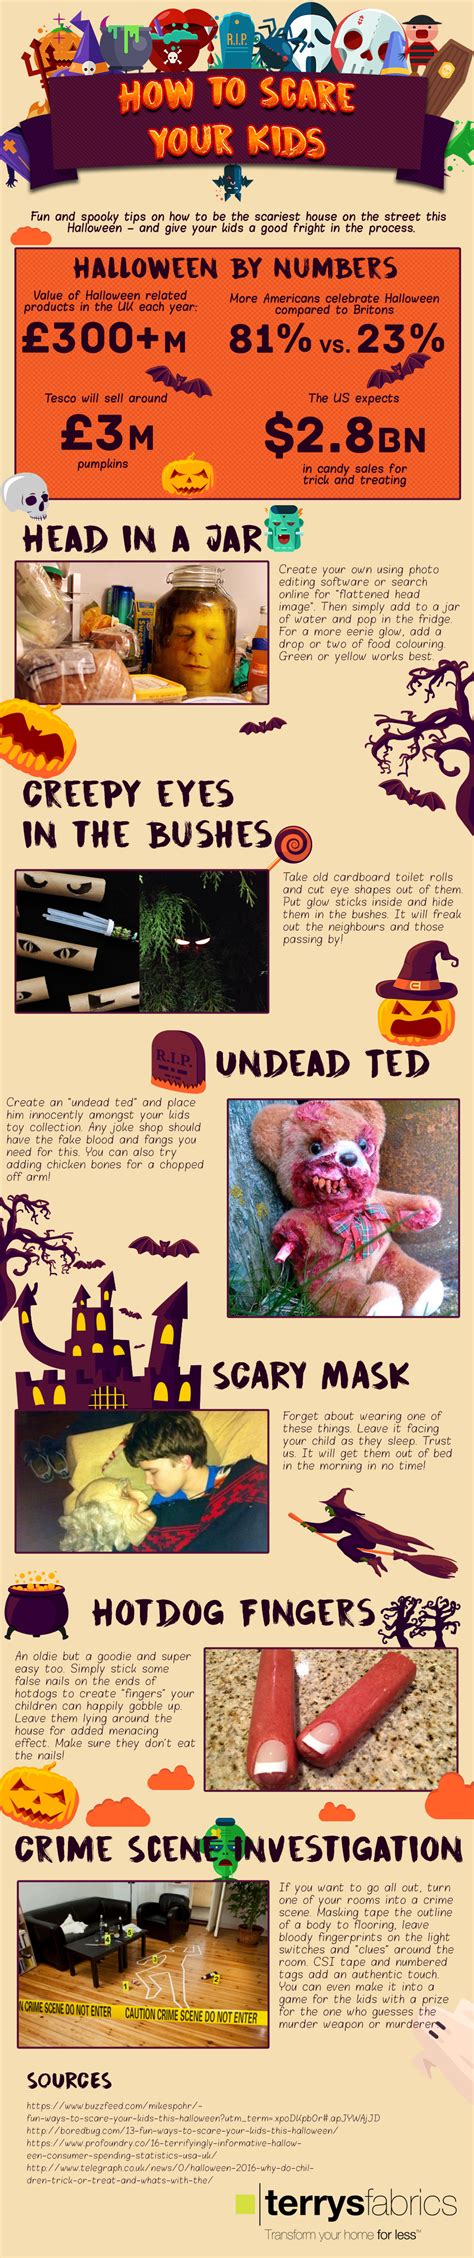 How To Scare Your Kids For Halloween Infographic Confessions Of The